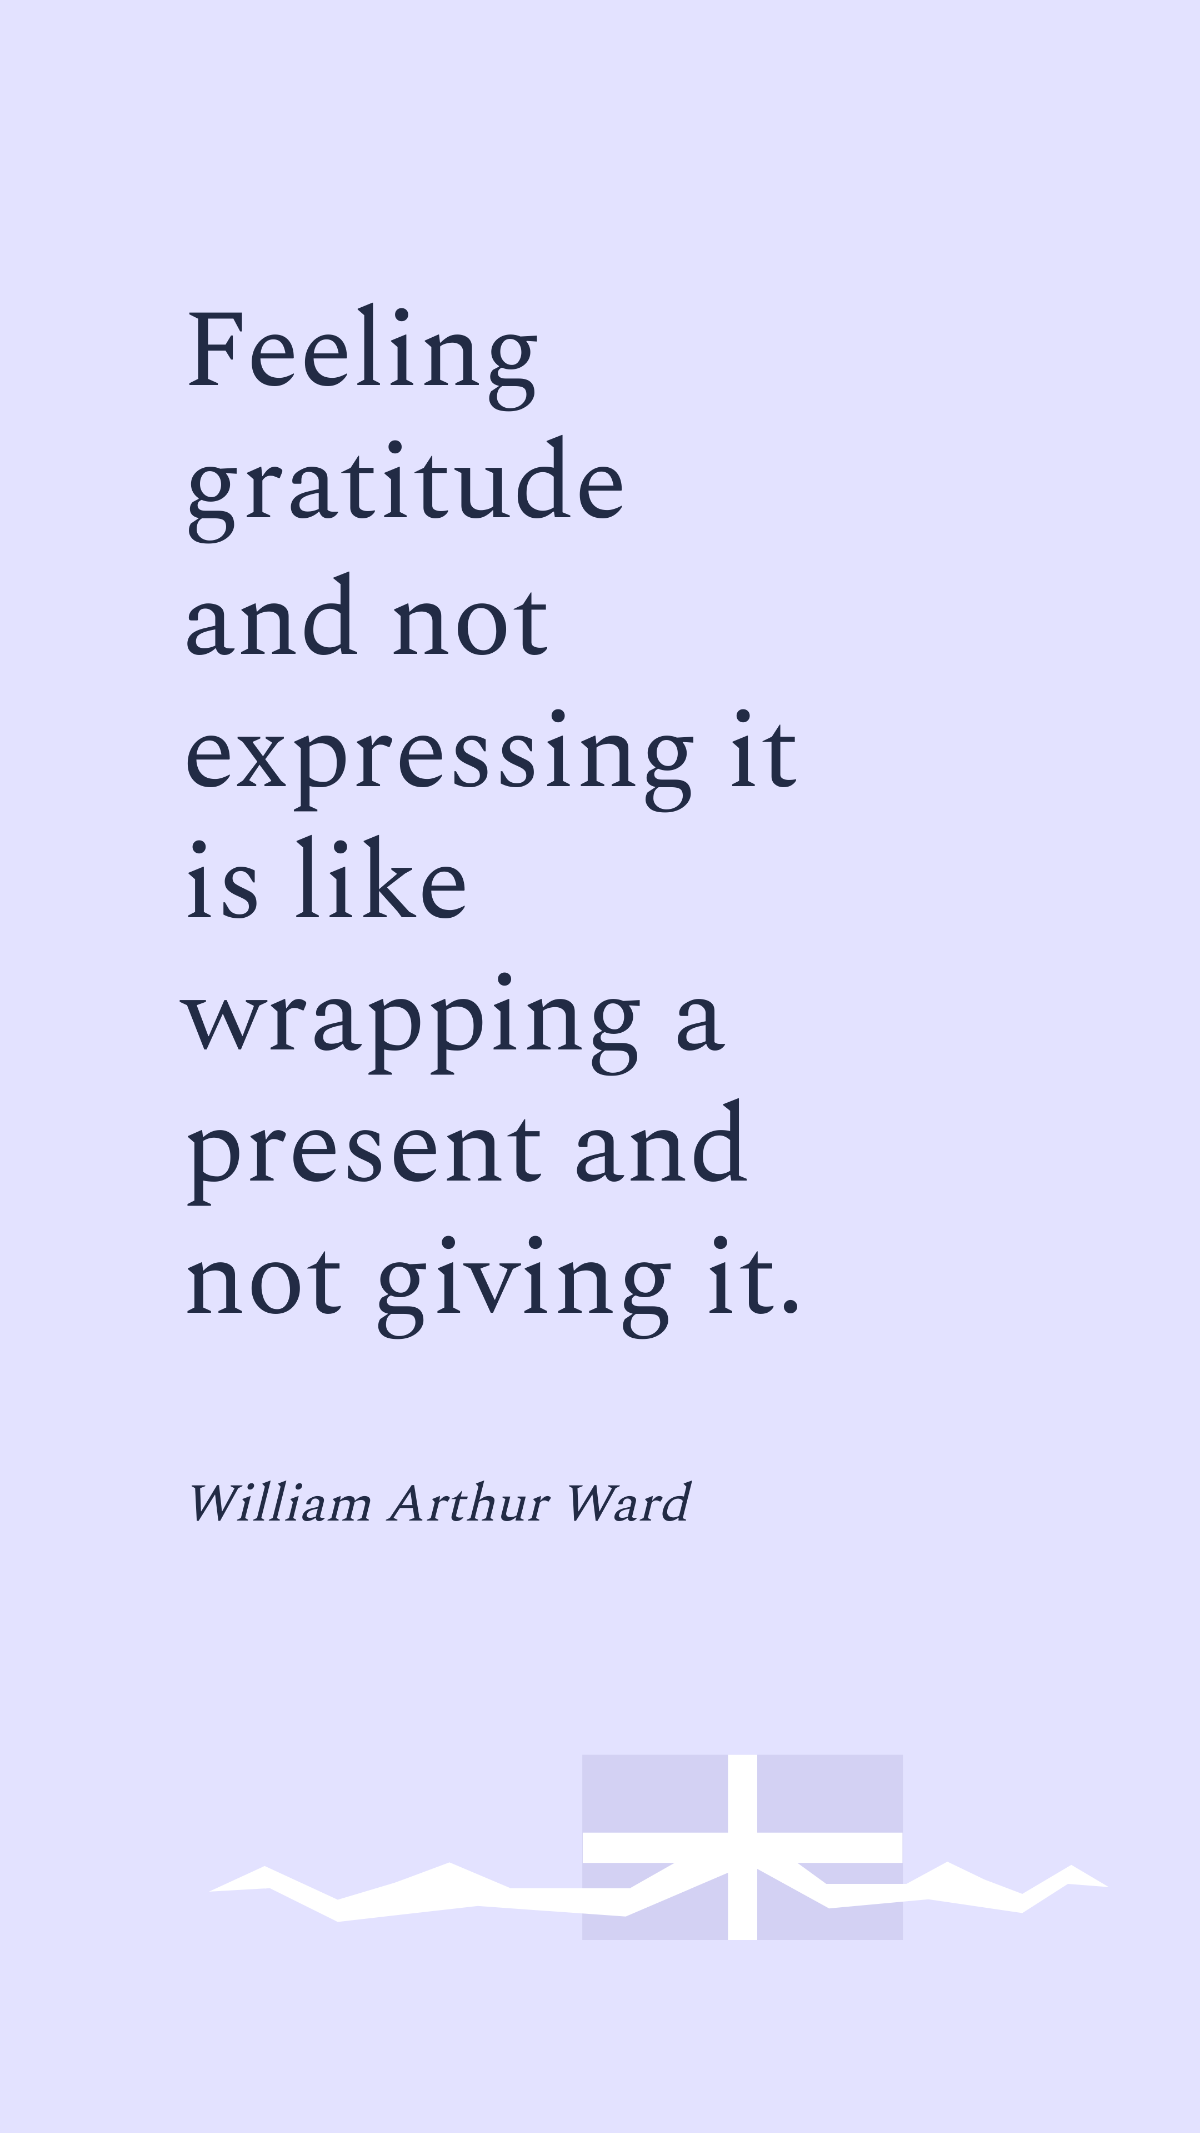 William Arthur Ward - Feeling gratitude and not expressing it is like wrapping a present and not giving it.  Template